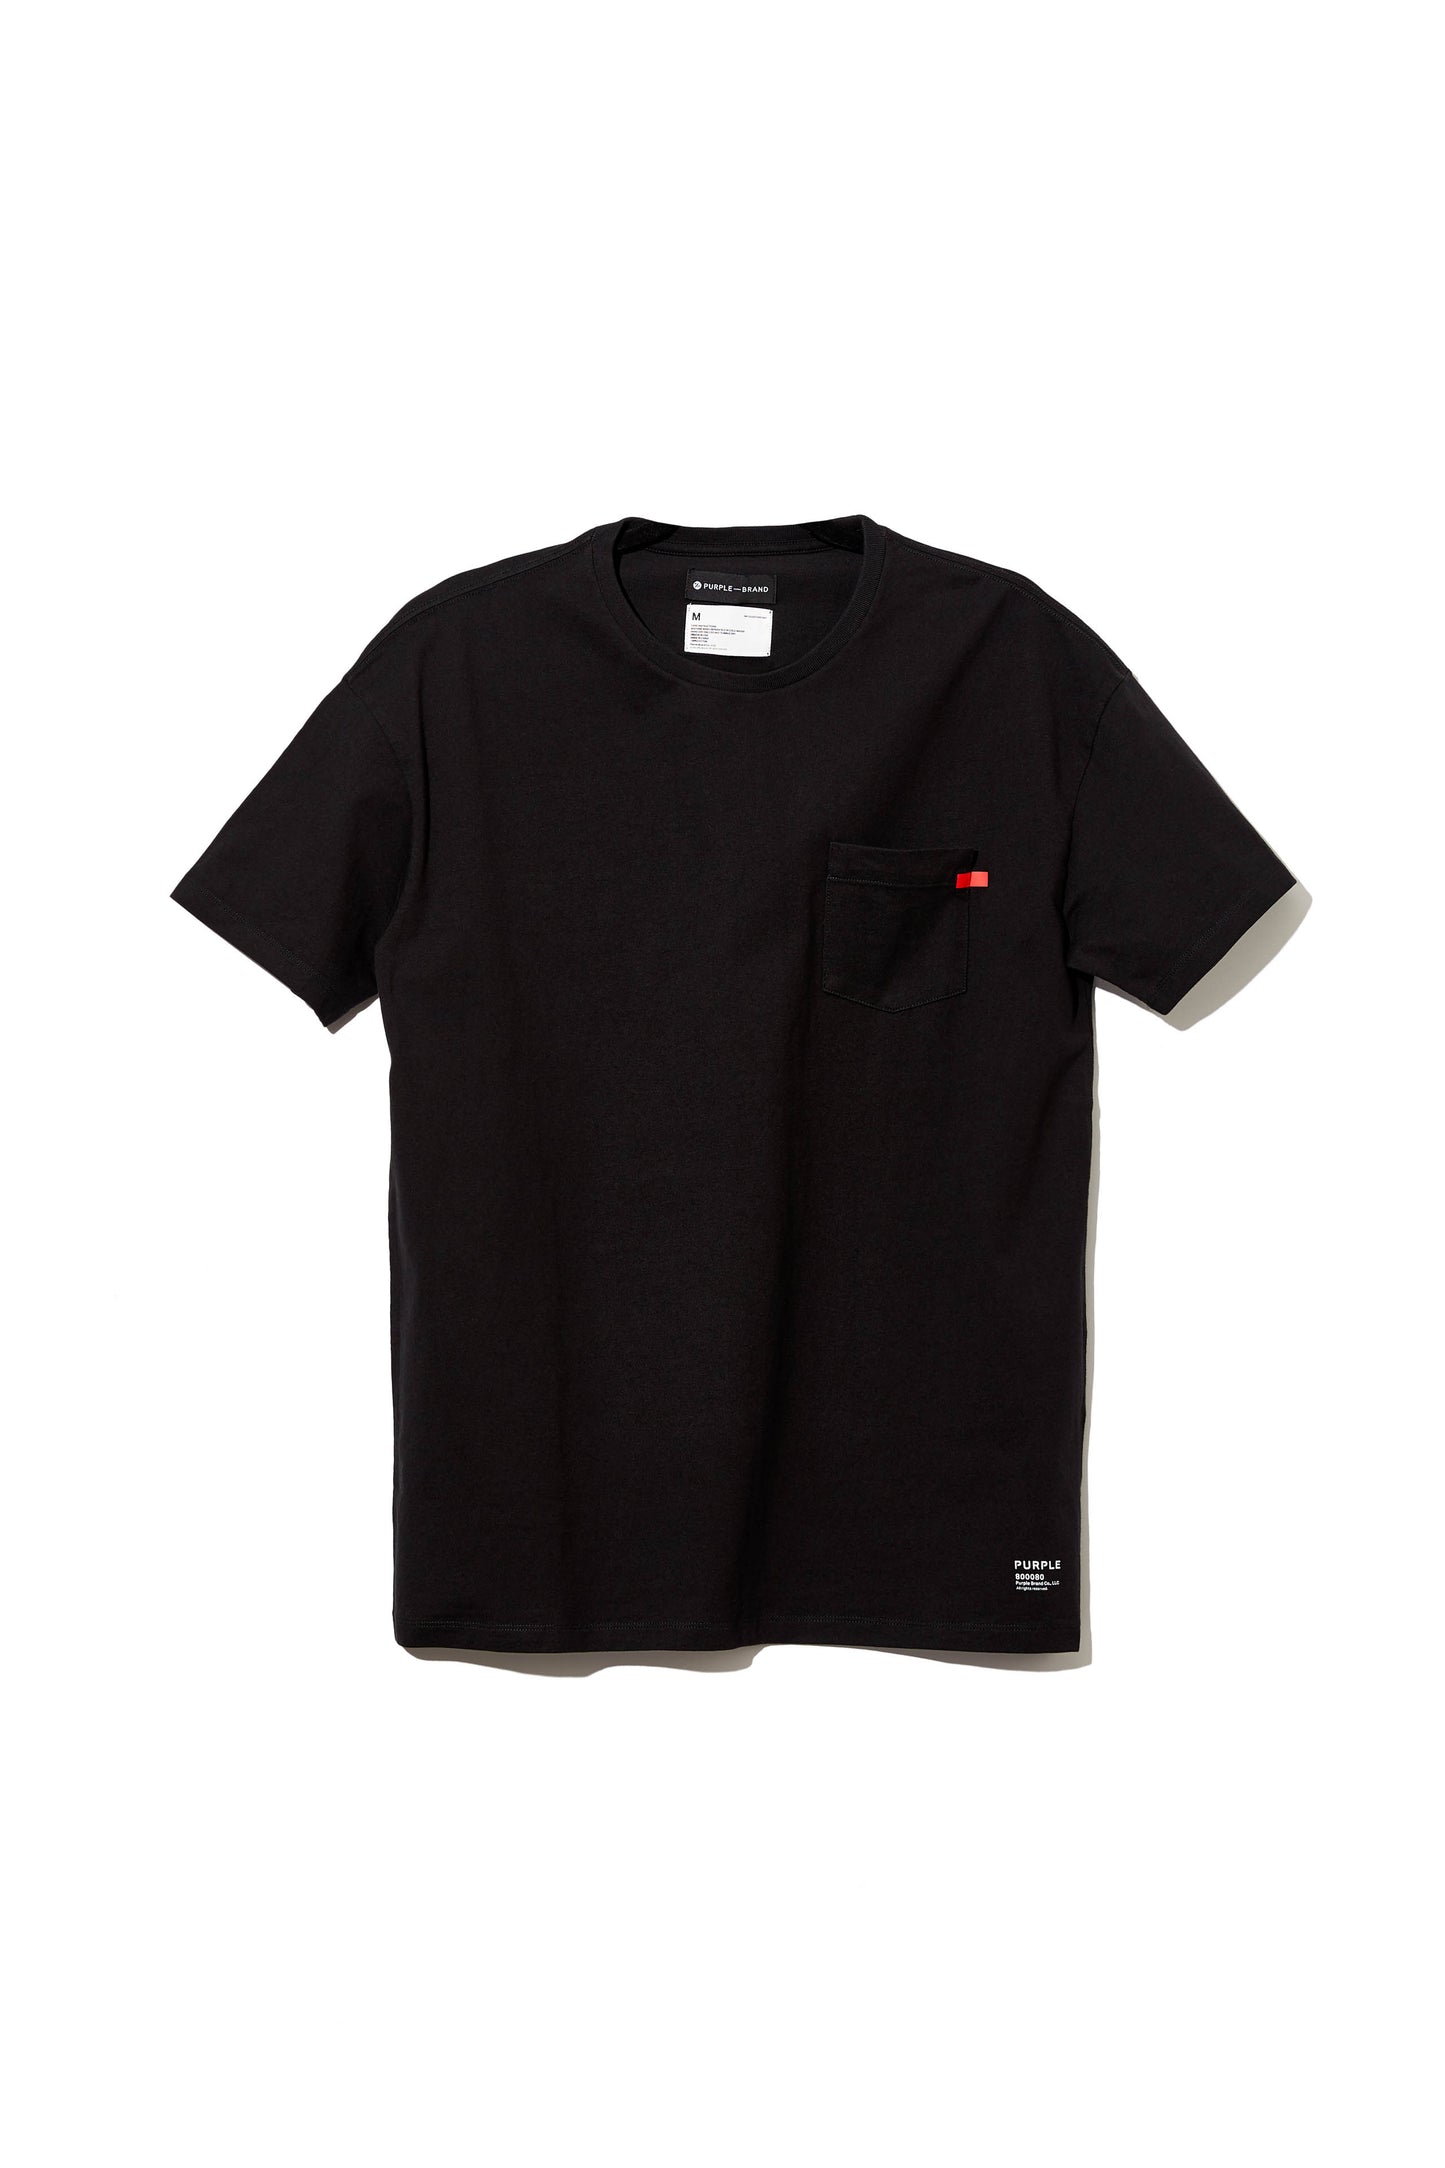 P101 RELAXED FIT TEE - Framis Black